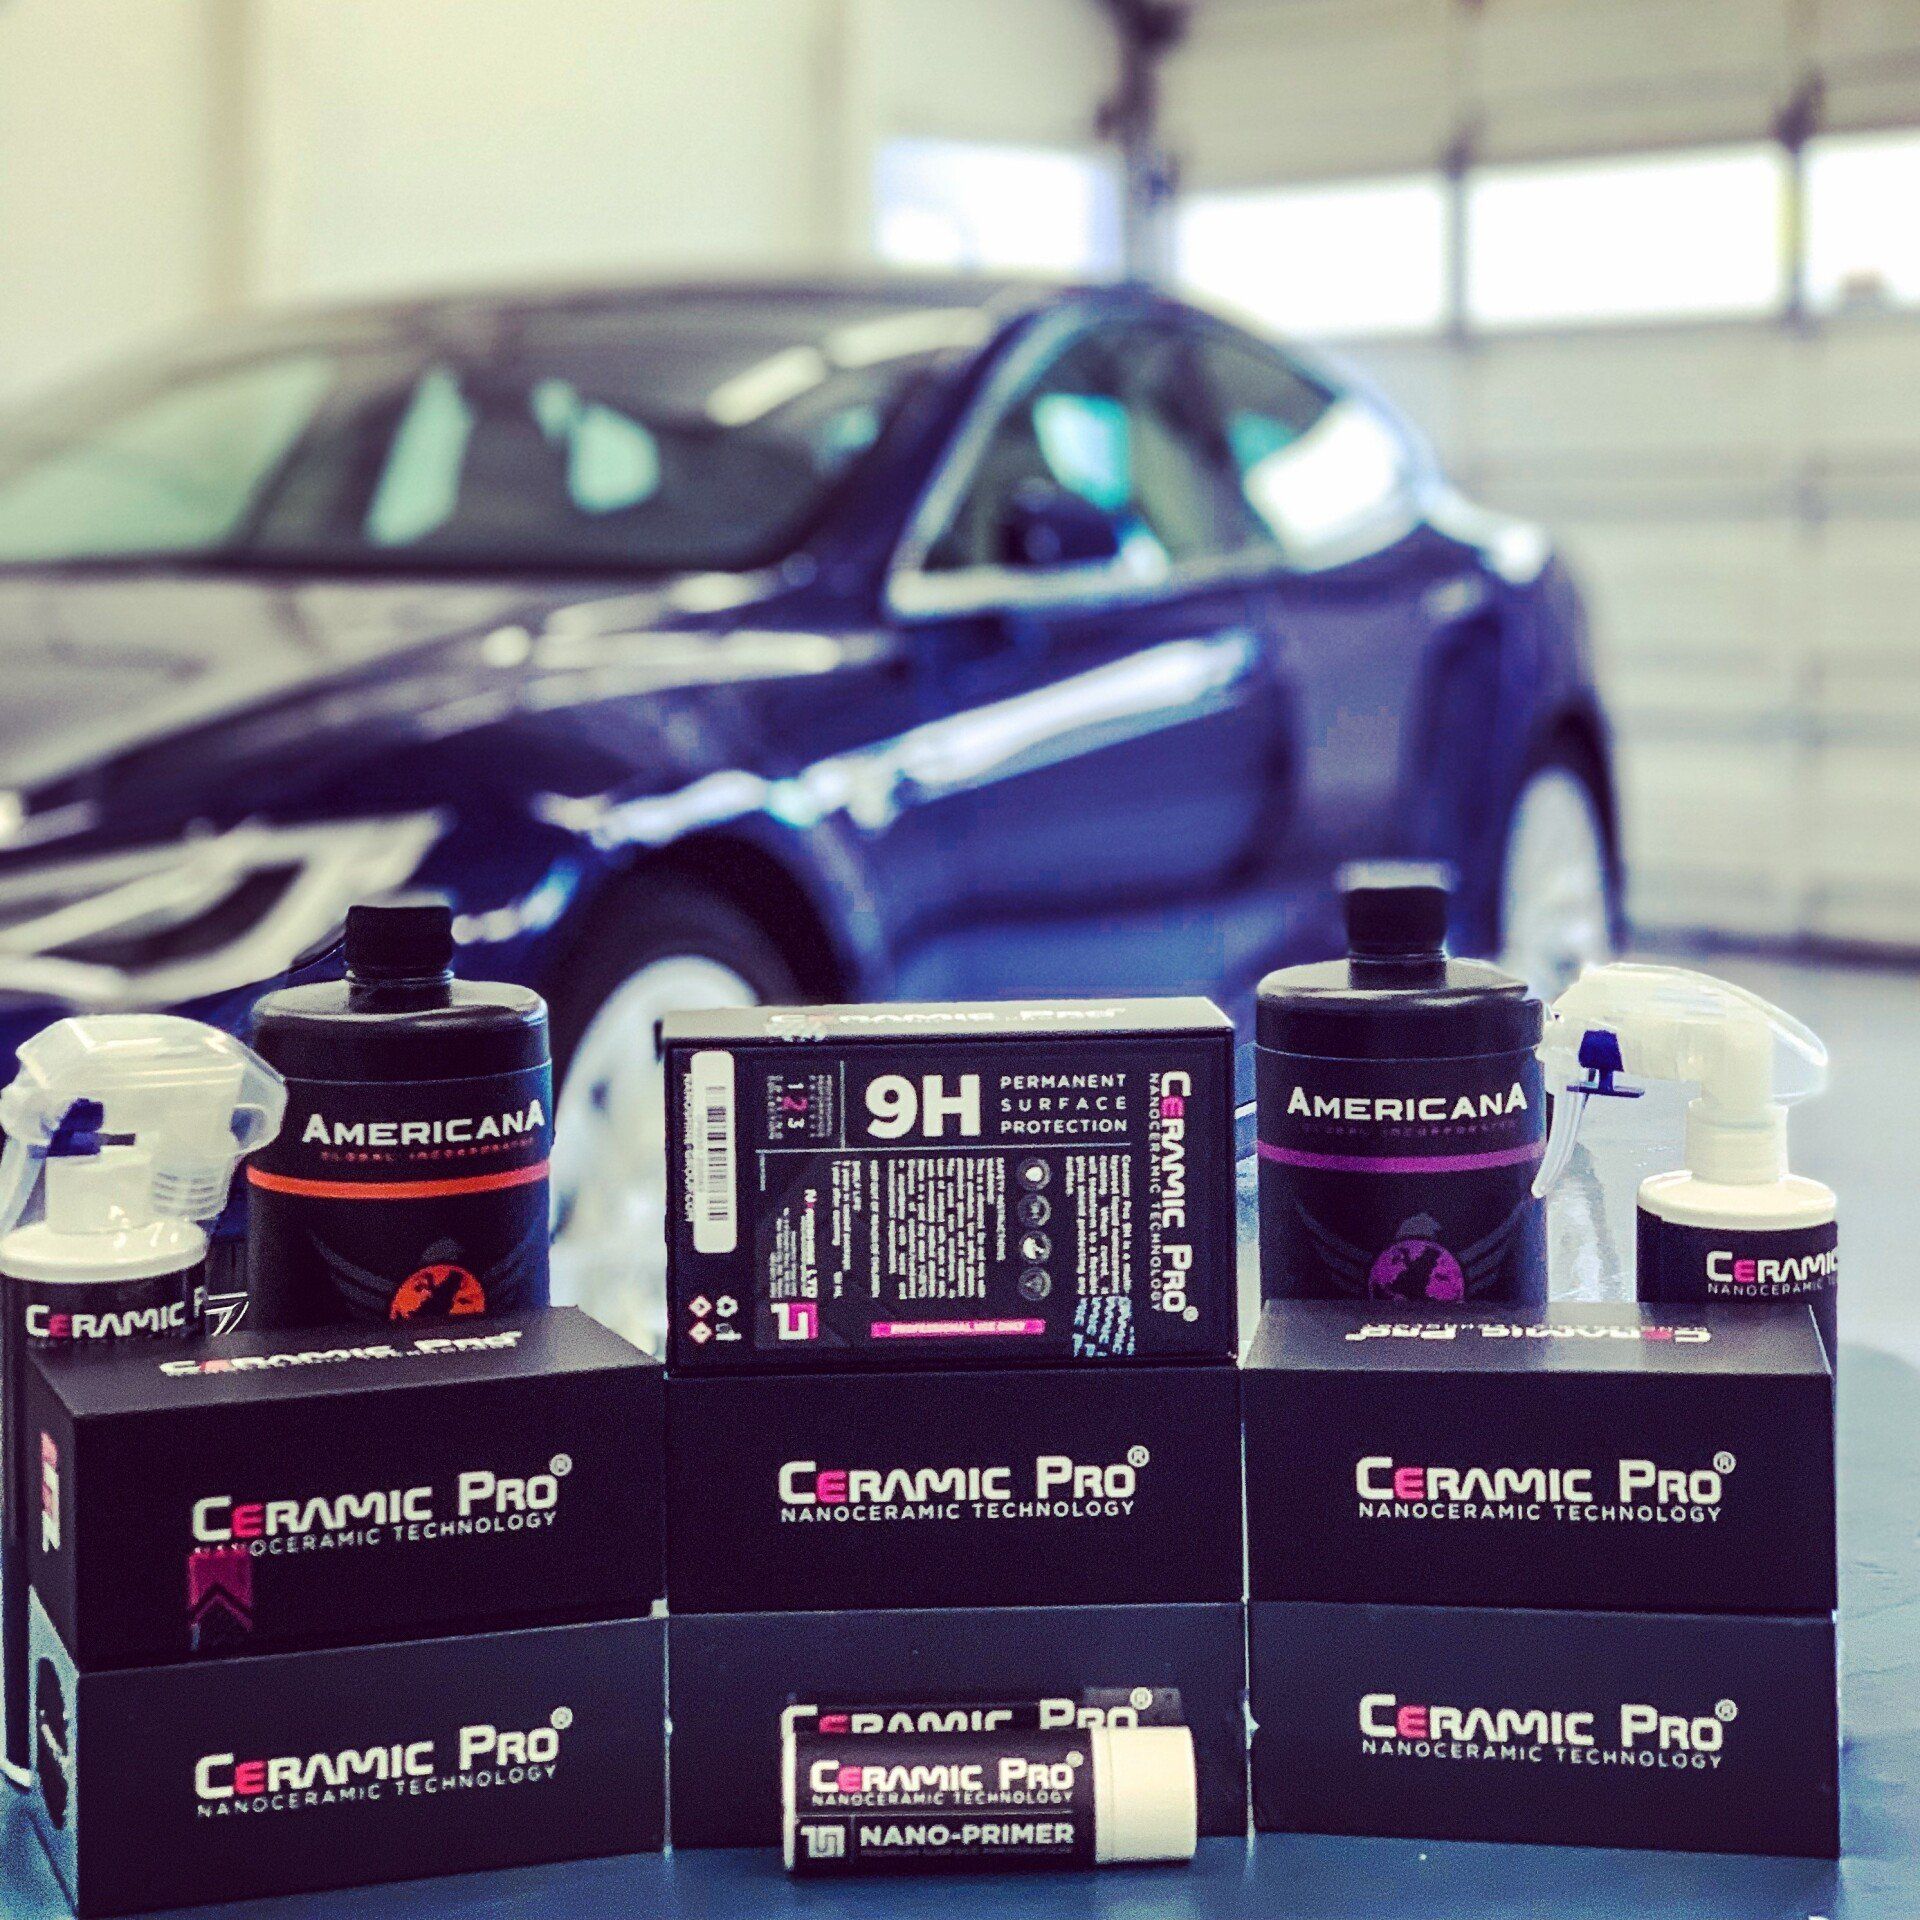 Ceramic Pro Products and a Blue Car in the background